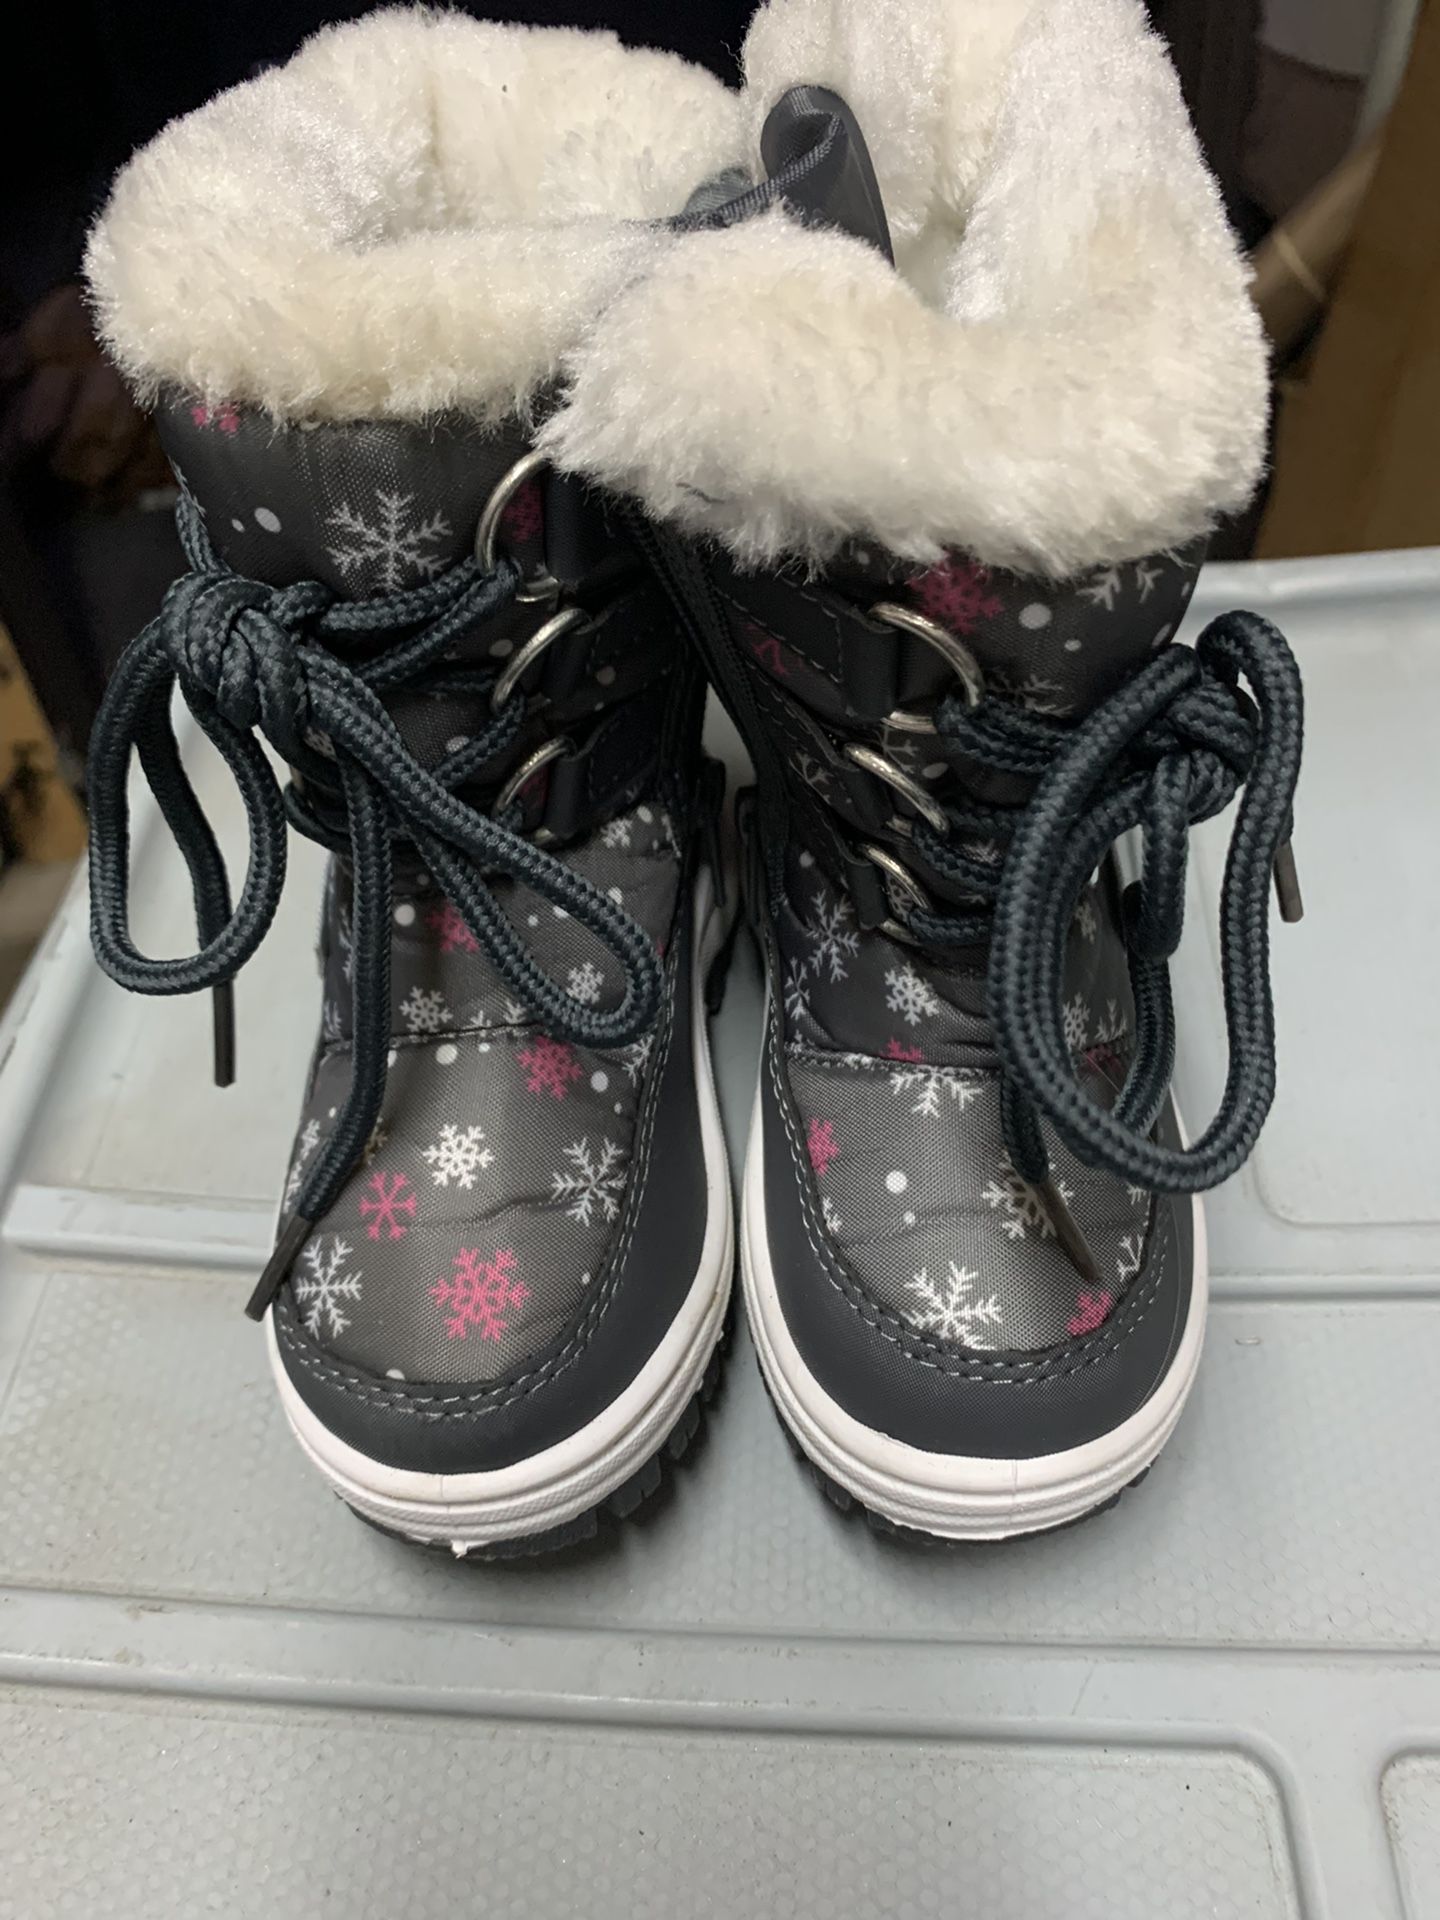 Toddler Fur Lined Snow Boots Size 6